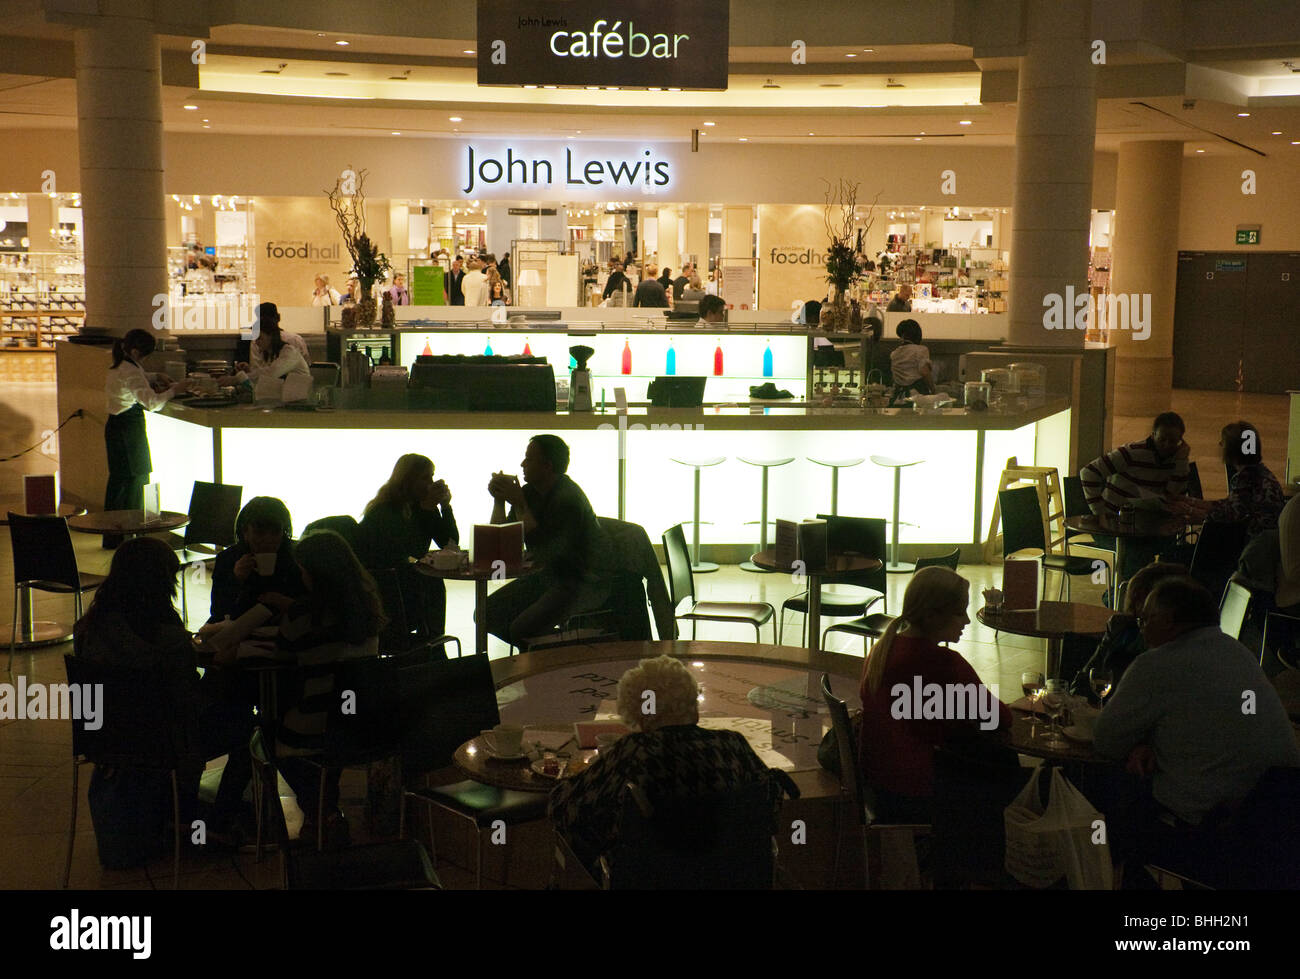 Il cafe bar, John Lewis Store, Bluewater Shopping Mall, Kent, Regno Unito Foto Stock